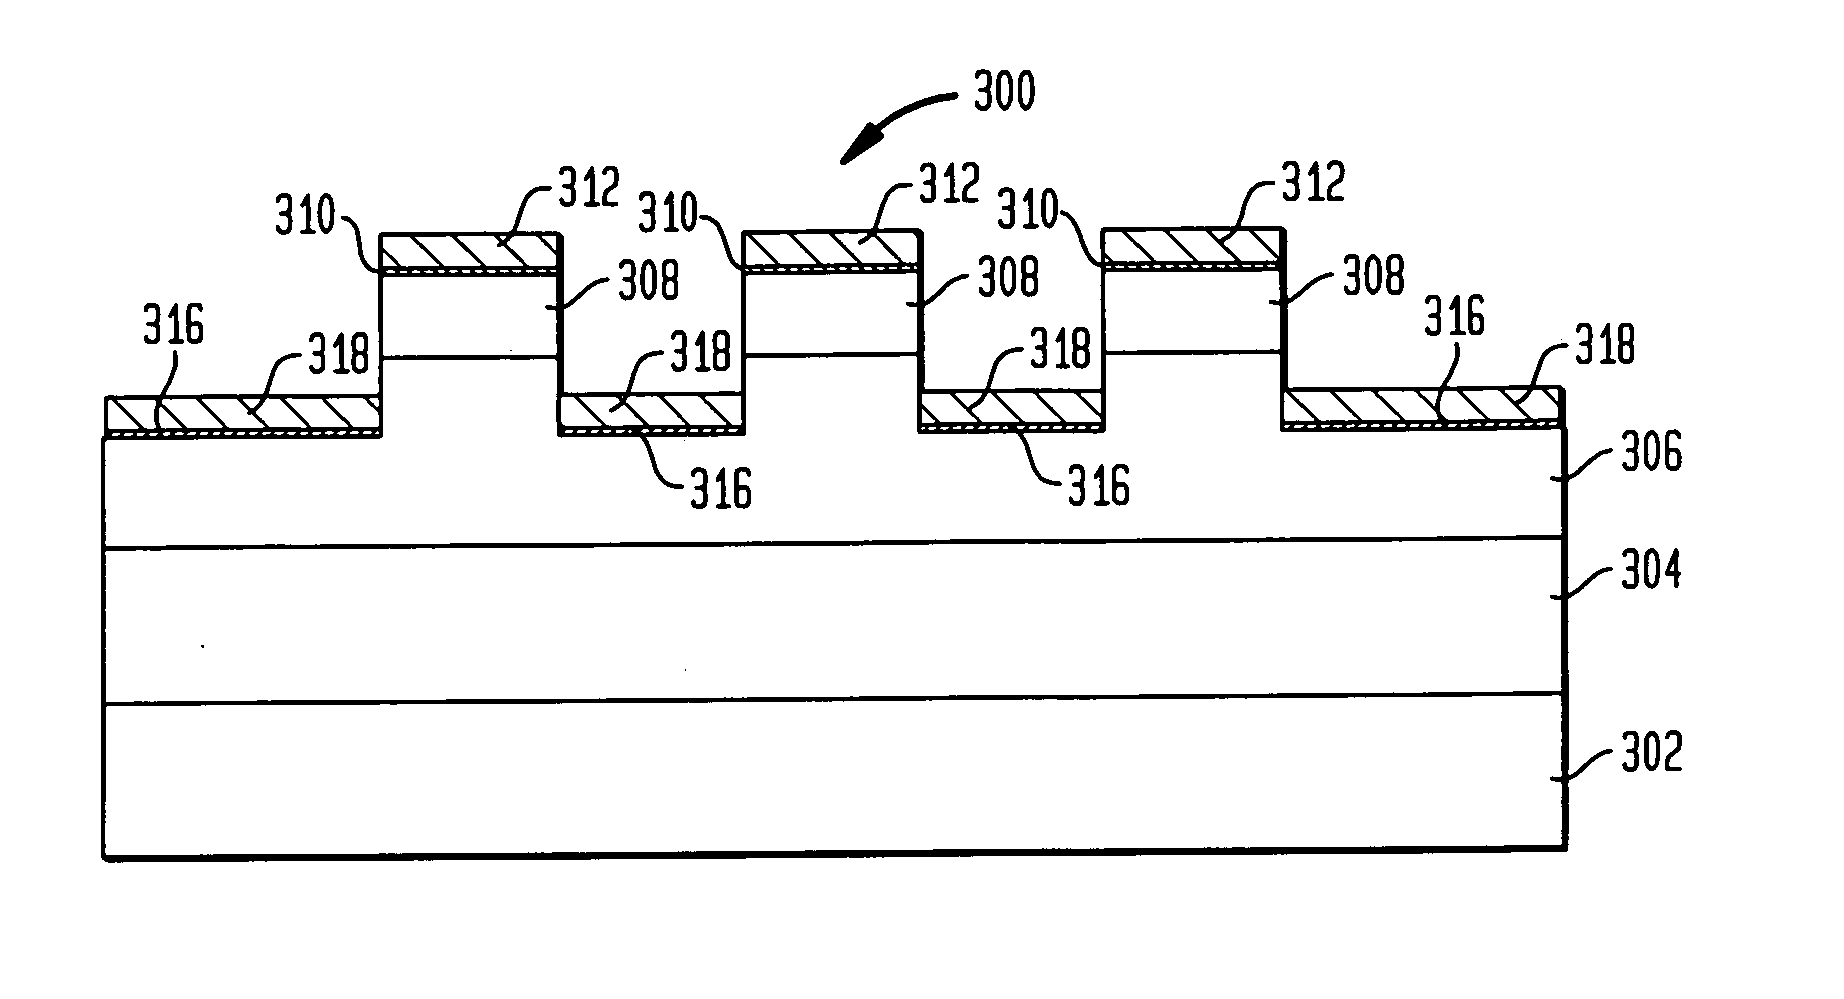 Lateral conduction schottky diode with plural mesas